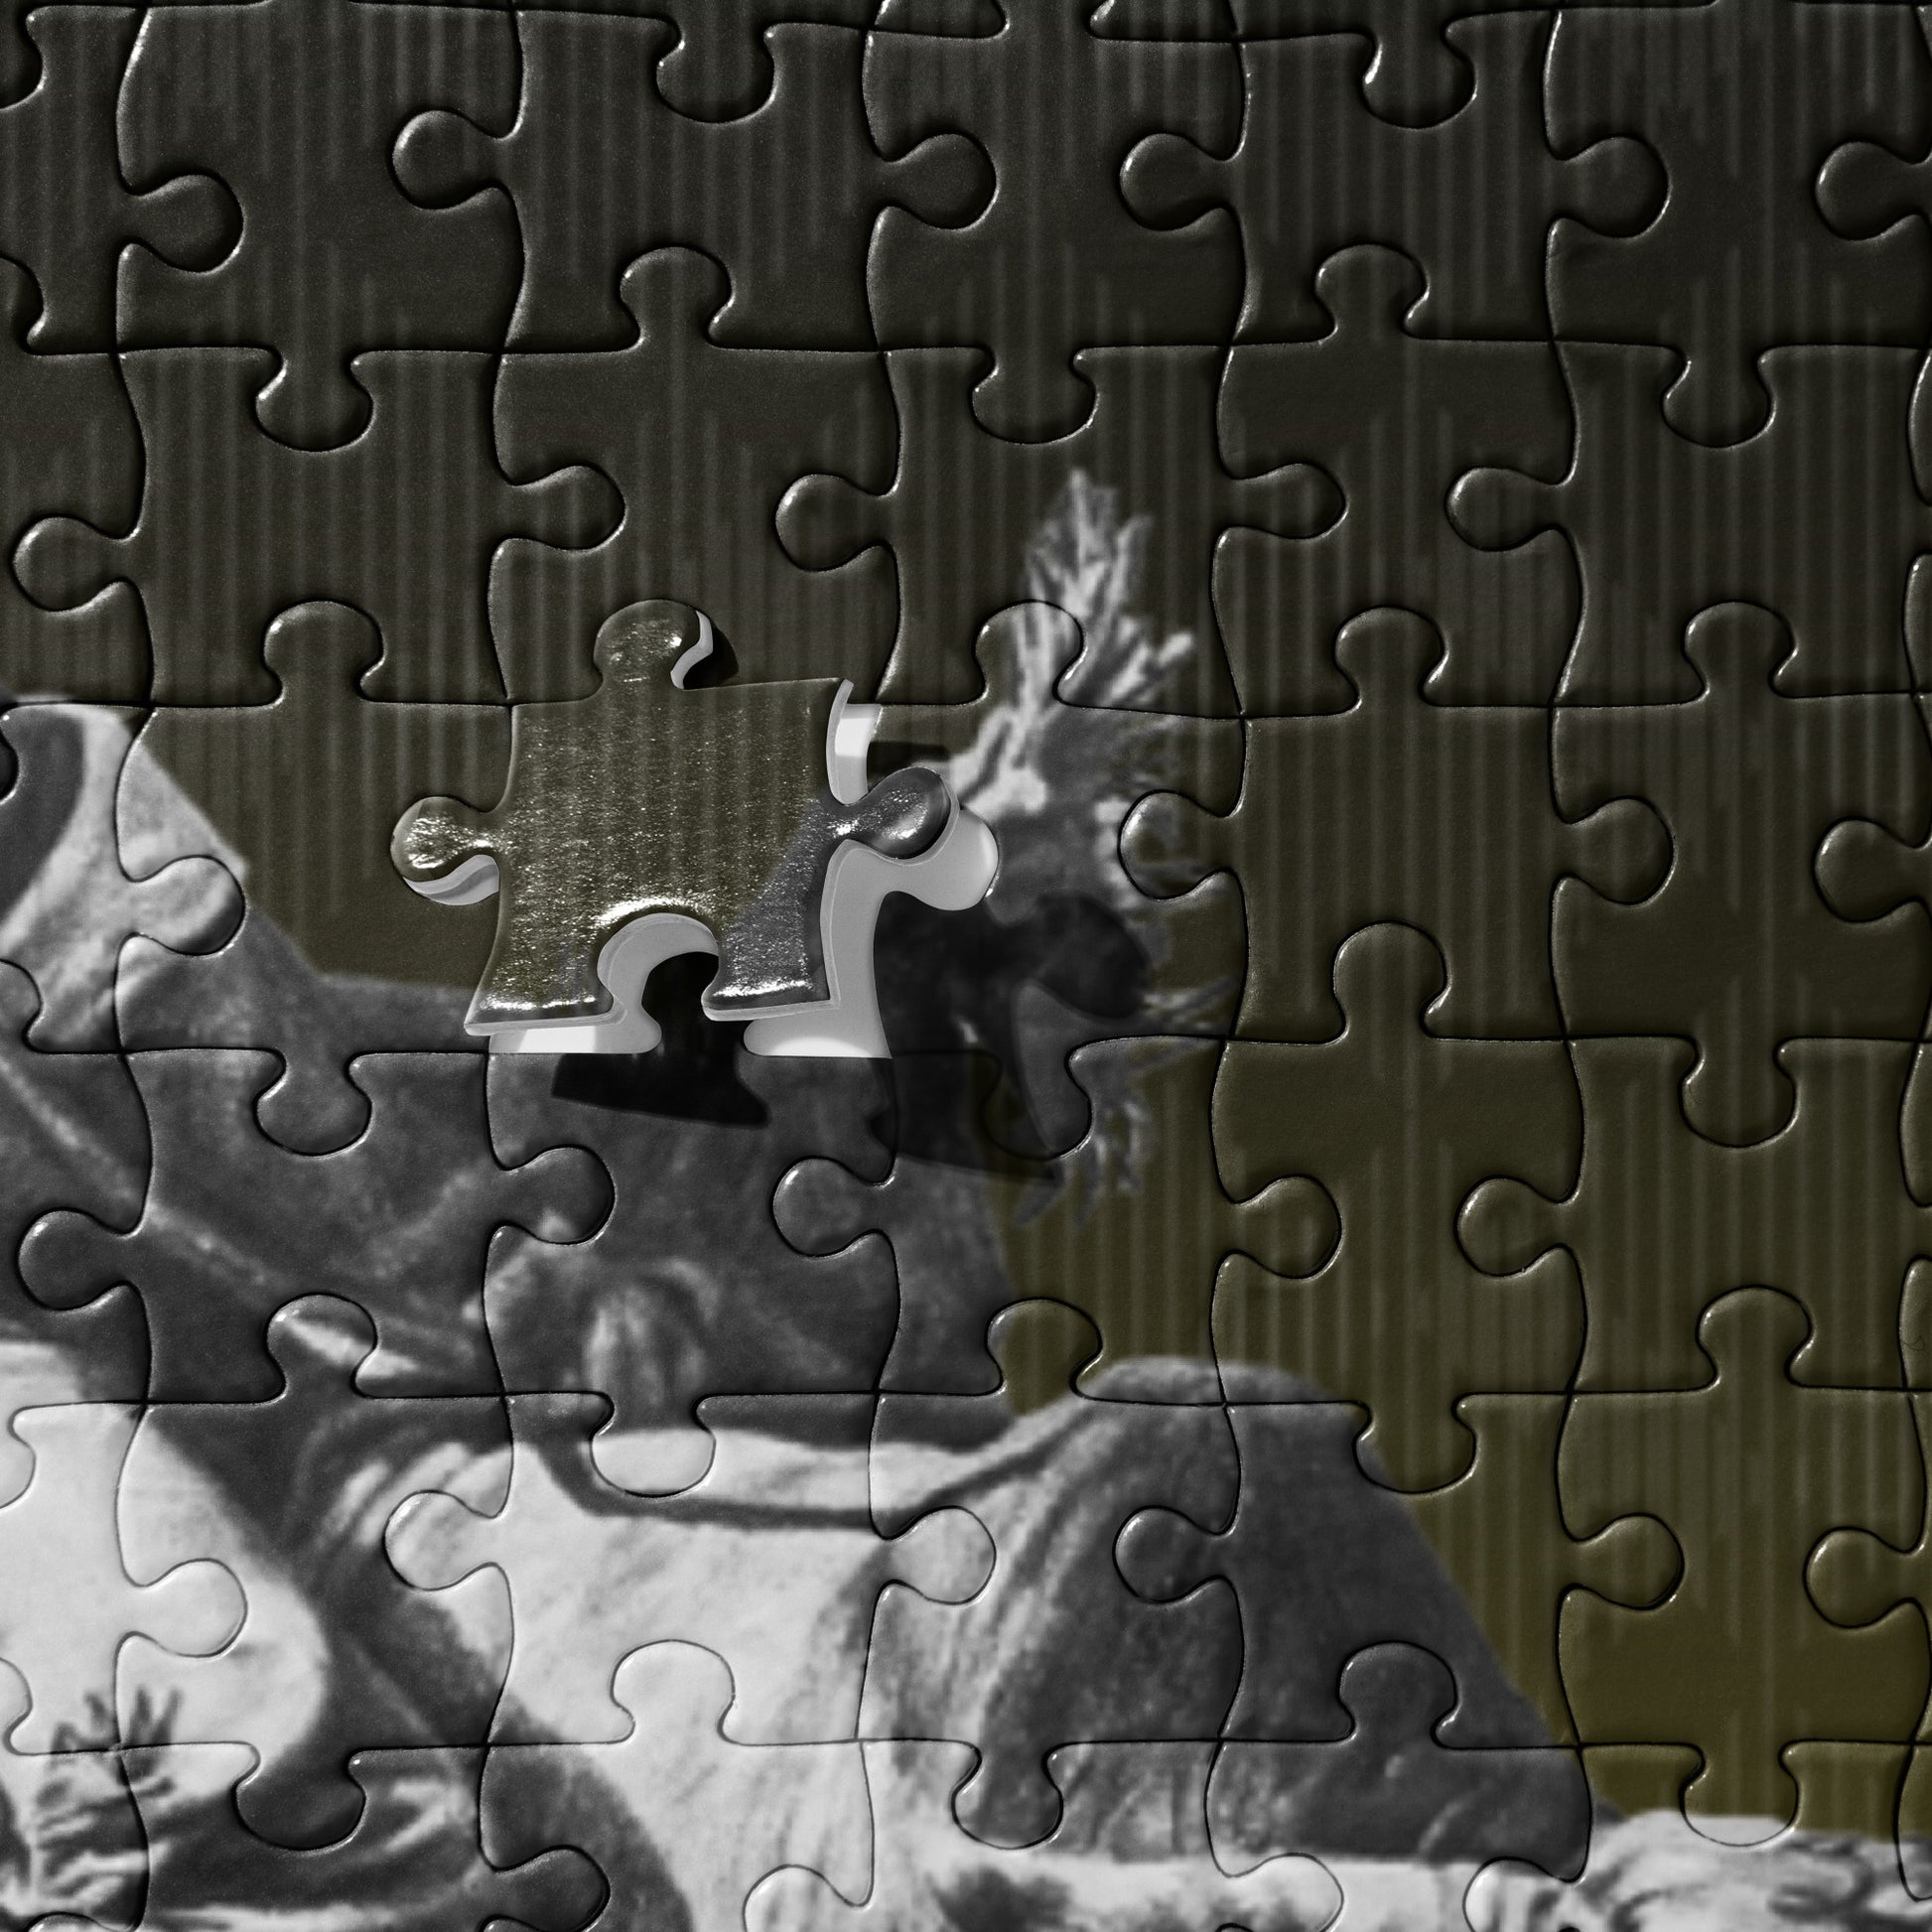 The "Bull Rider Jigsaw Puzzle" is from a drawing of mine created with graphite pencil of a cowboy on a bucking bull. It has been digitally optimized and transferred to a pressed paper chipboard which makes it suitable for framing.